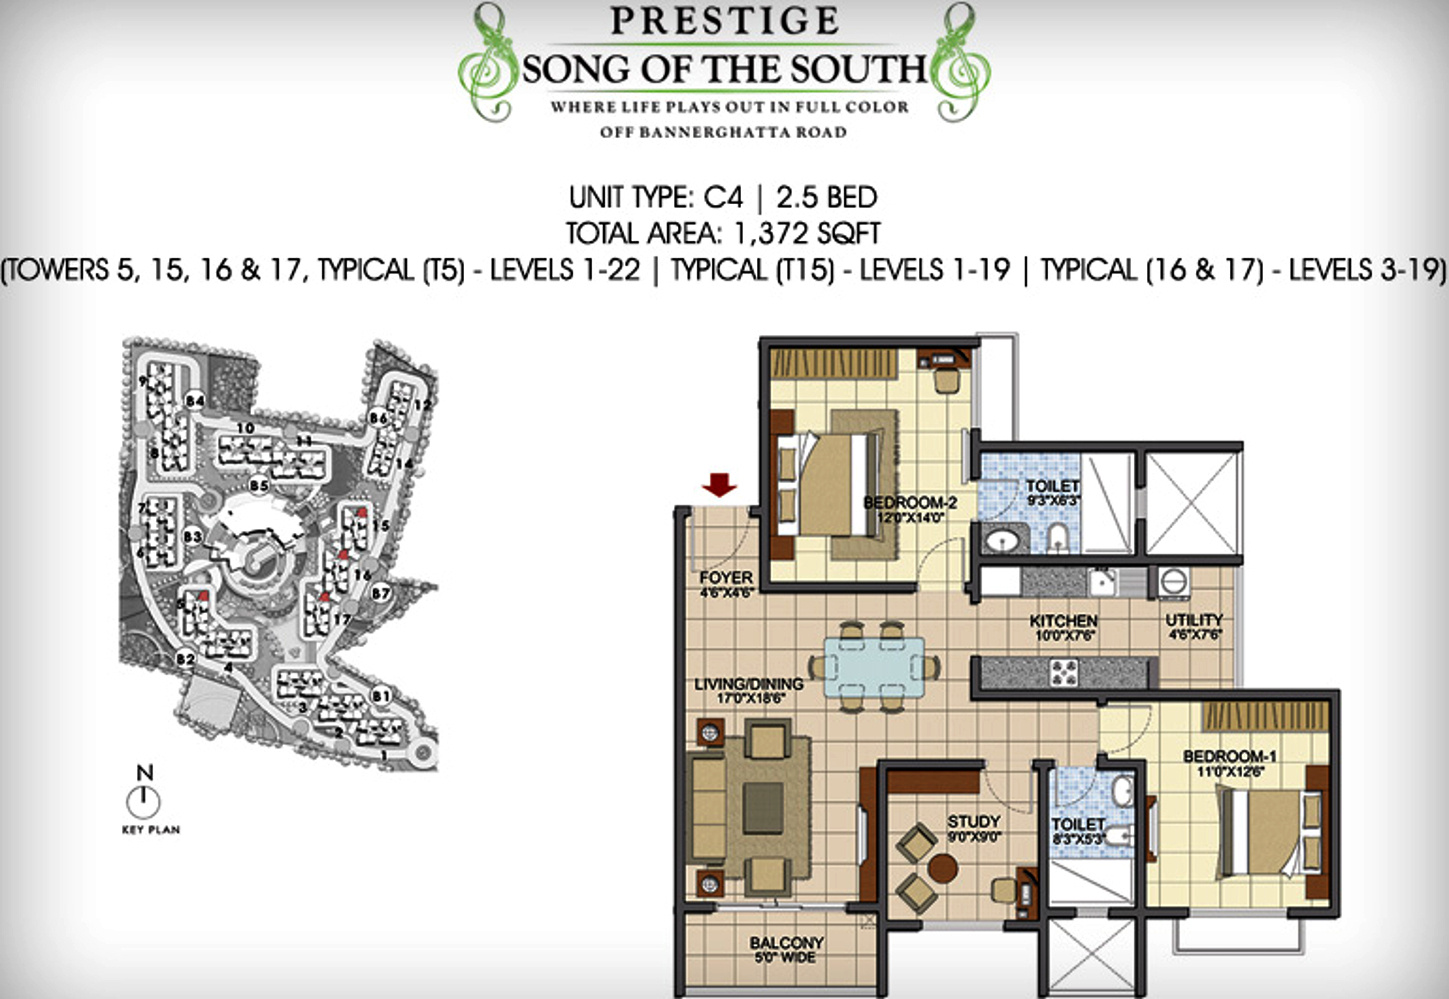 Prestige Song Of The South in Begur, Bangalore Price, Location Map, Floor Plan & Reviews